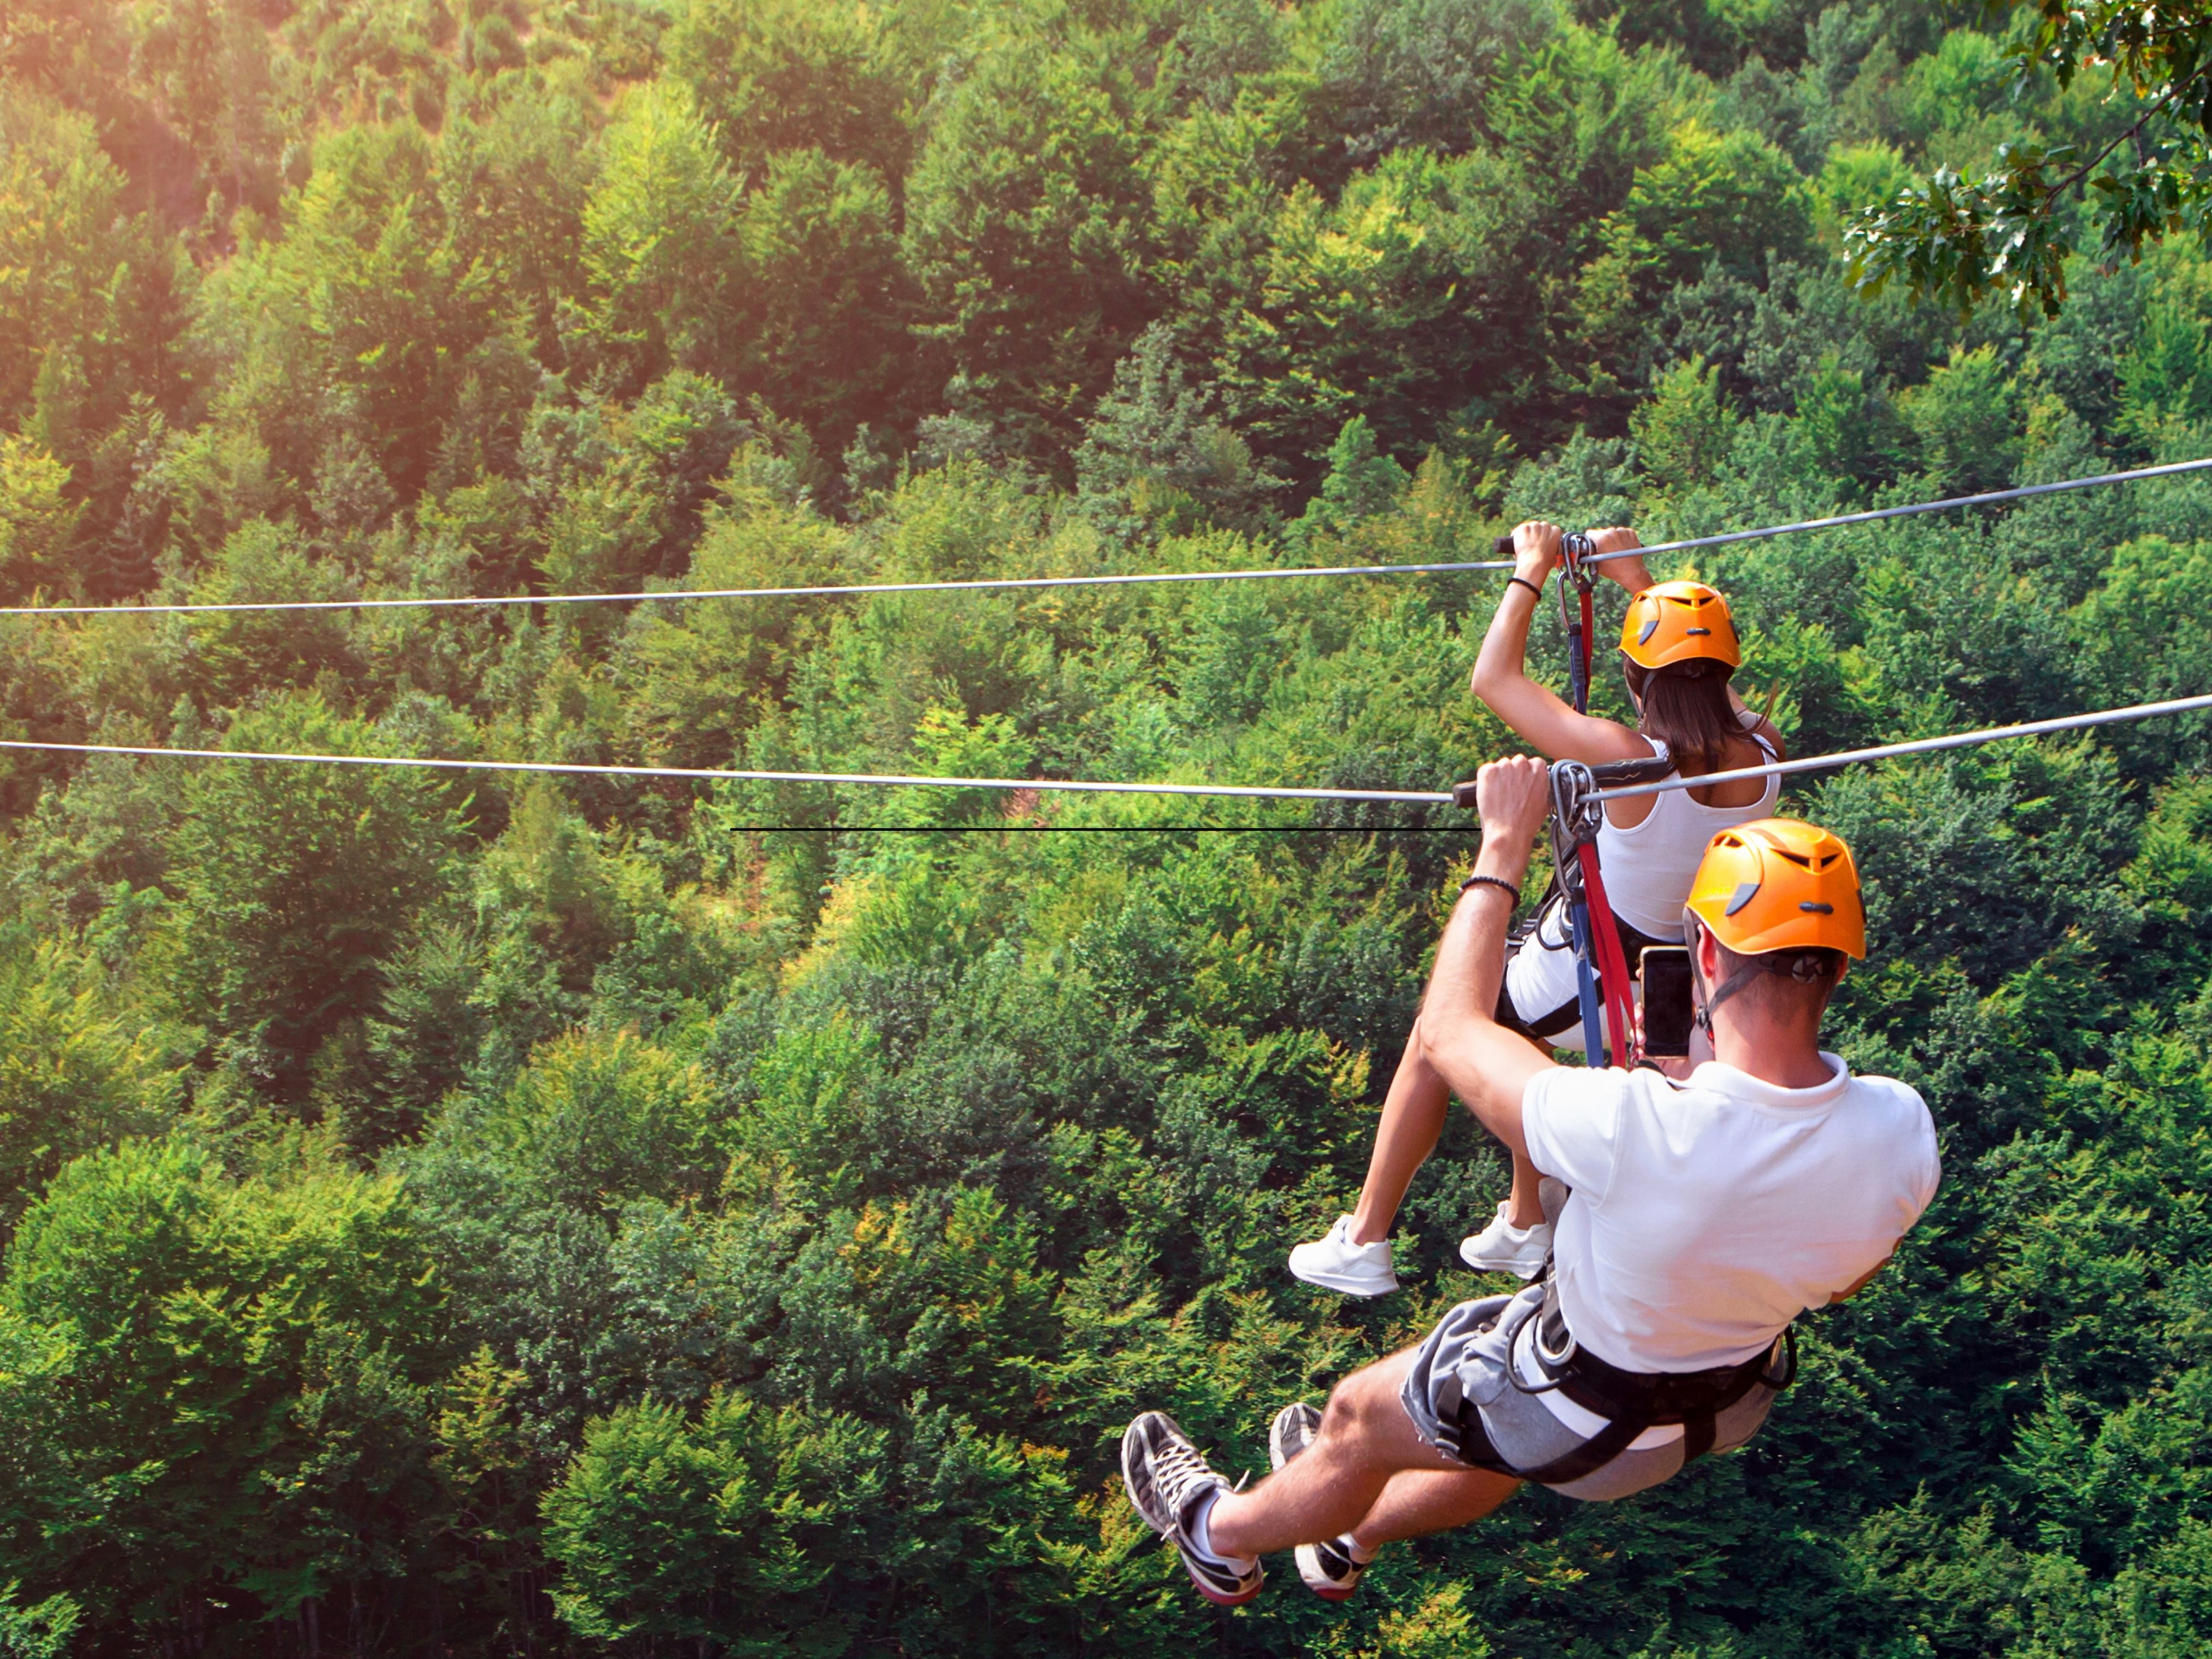 ziplining through the jungle is the perfect activity for families while vacationing in Maui